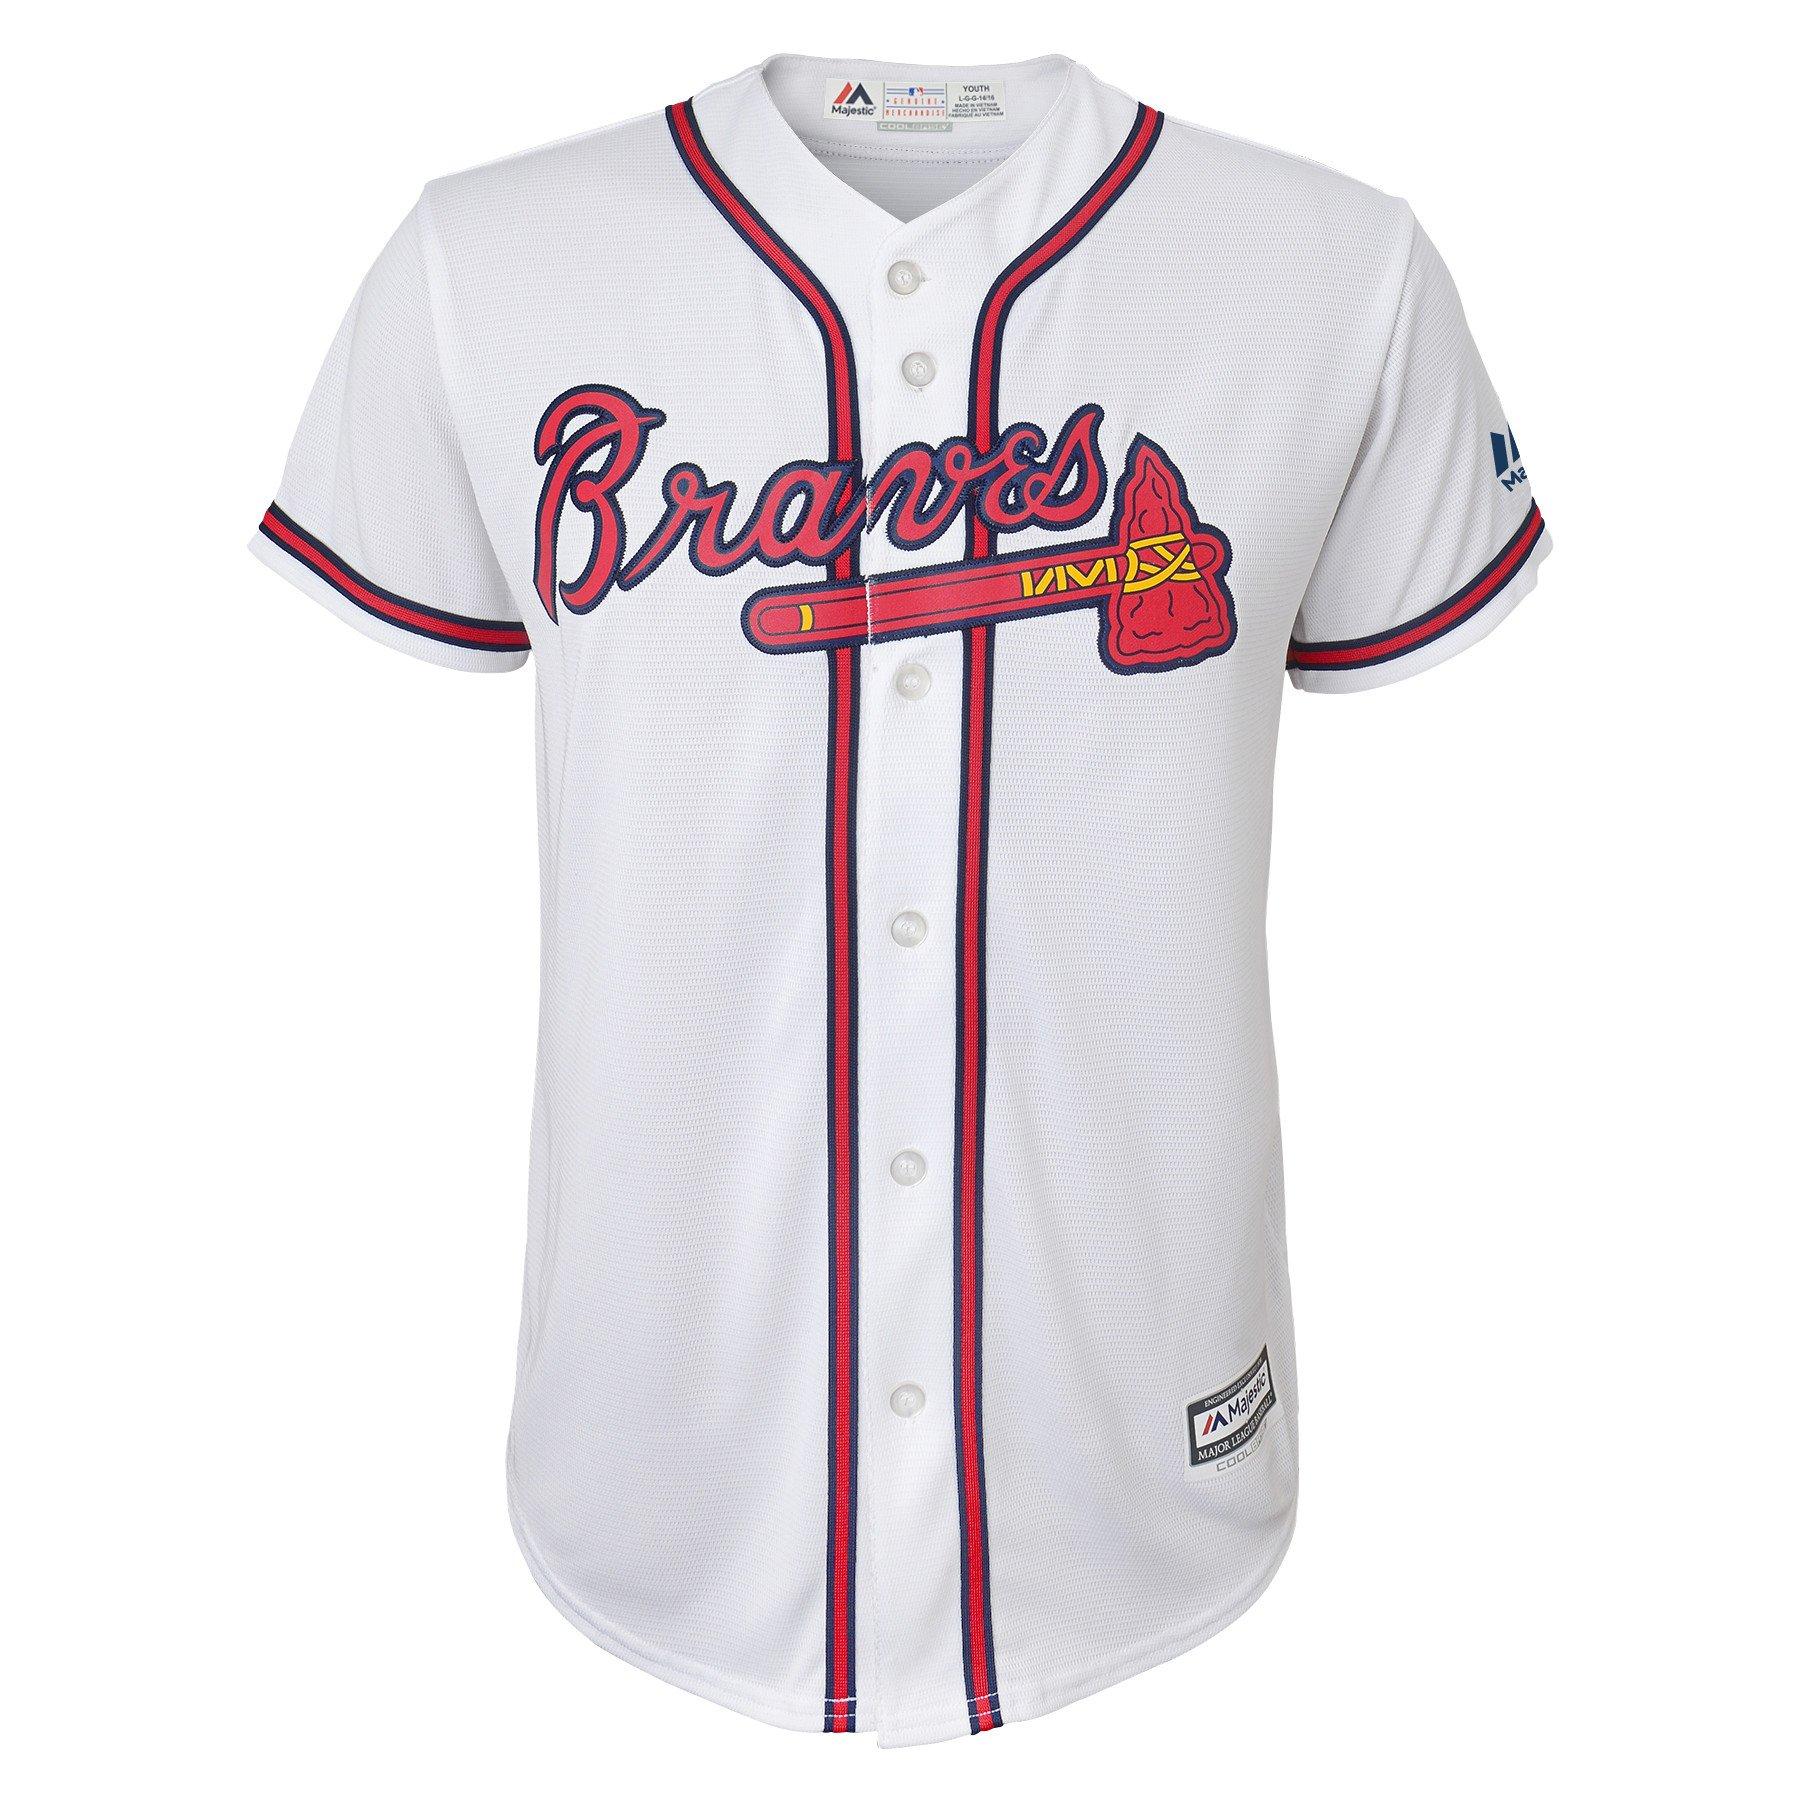 youth acuna jr jersey